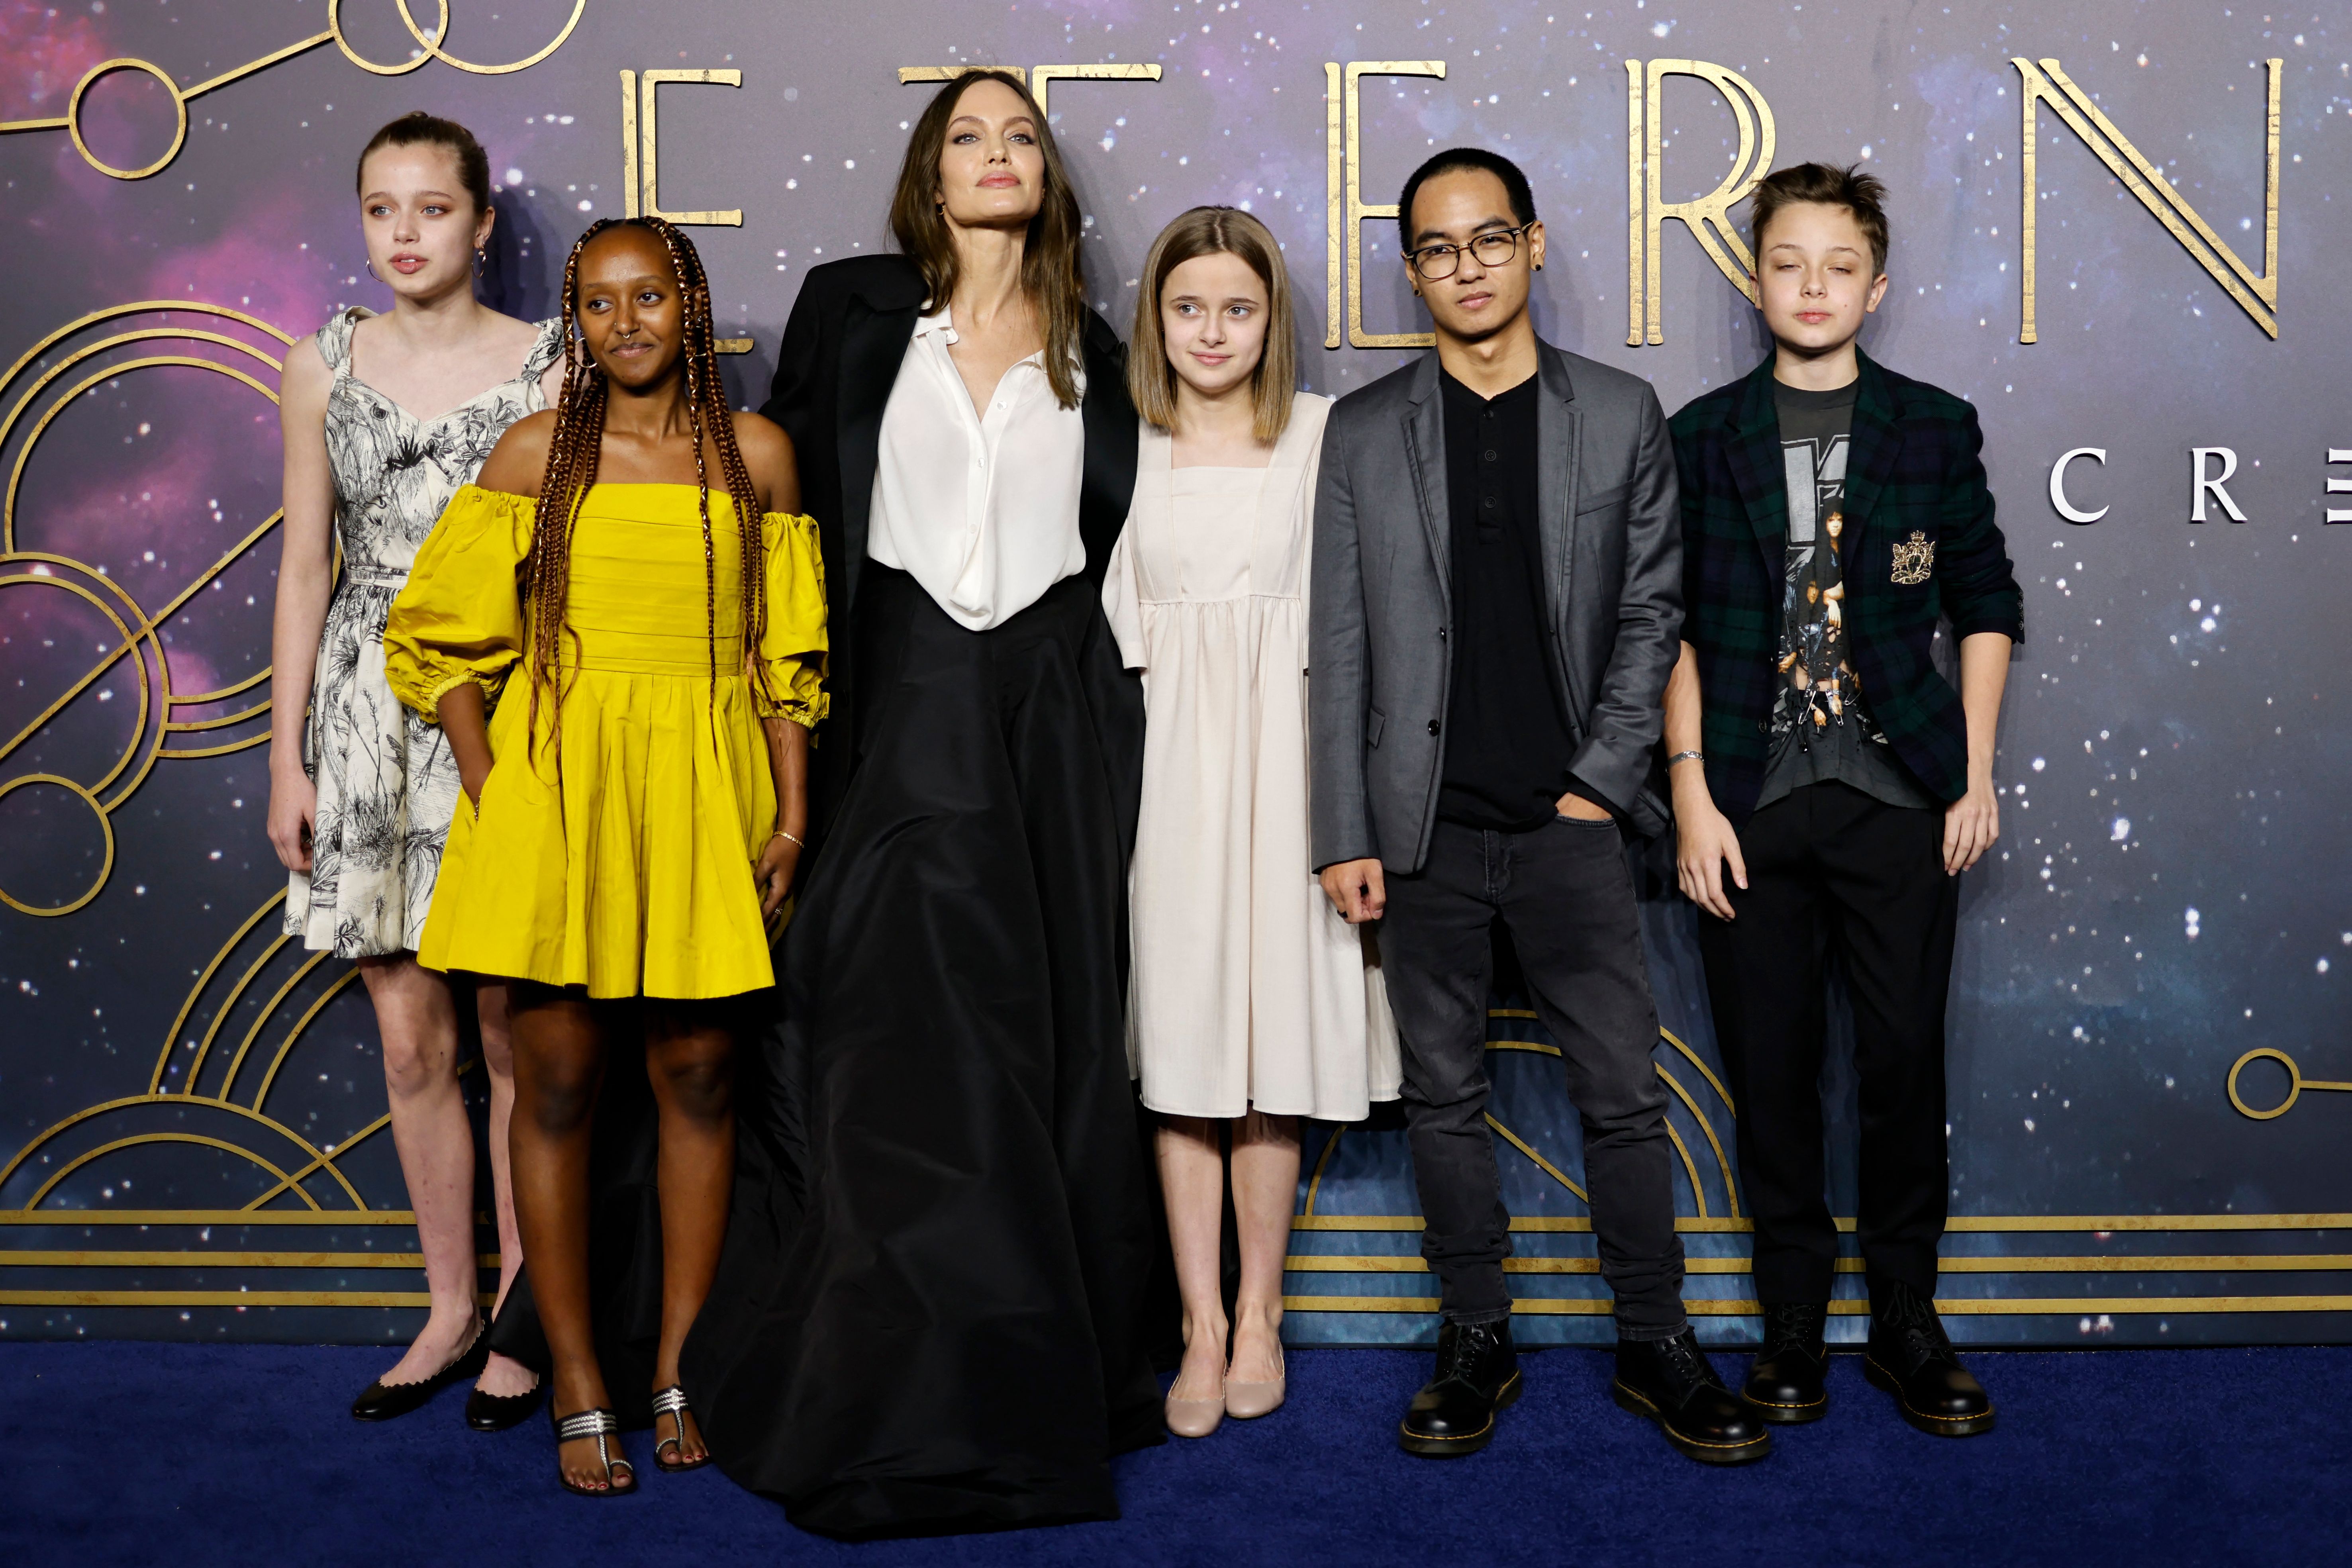 The Hollywood star shared six kids with Brad Pitt